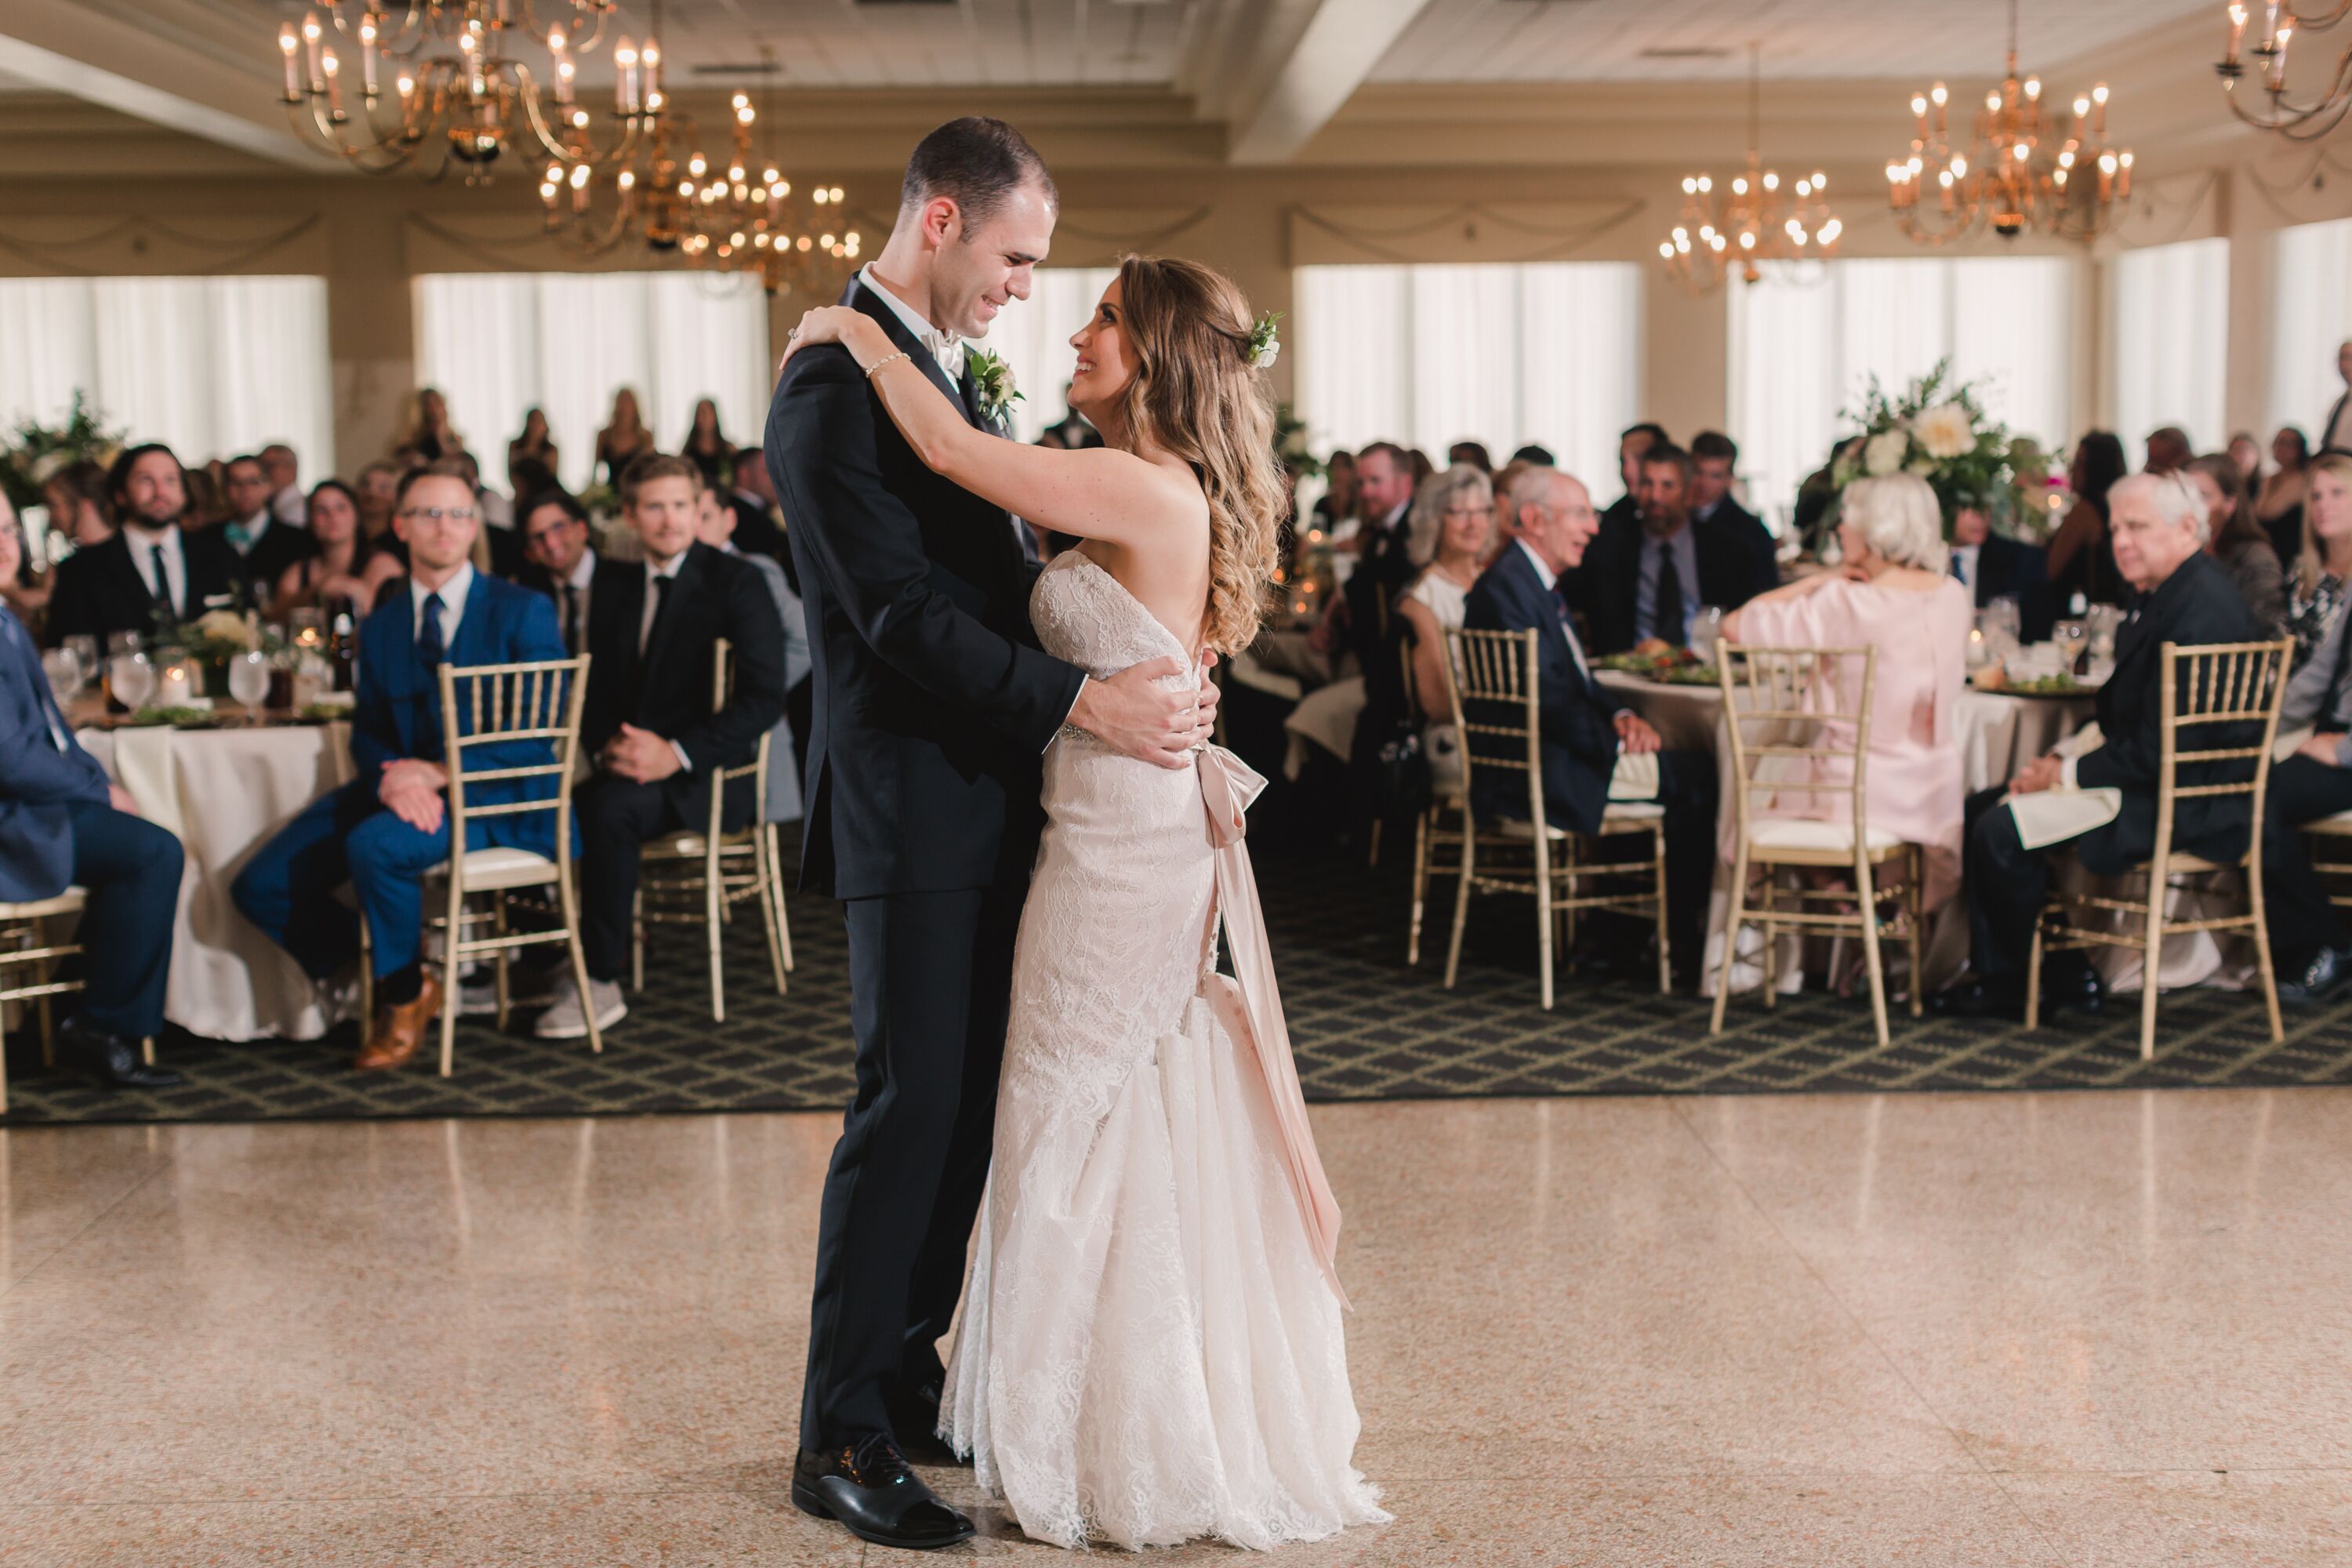 Sylvania Country Club | Reception Venues - The Knot